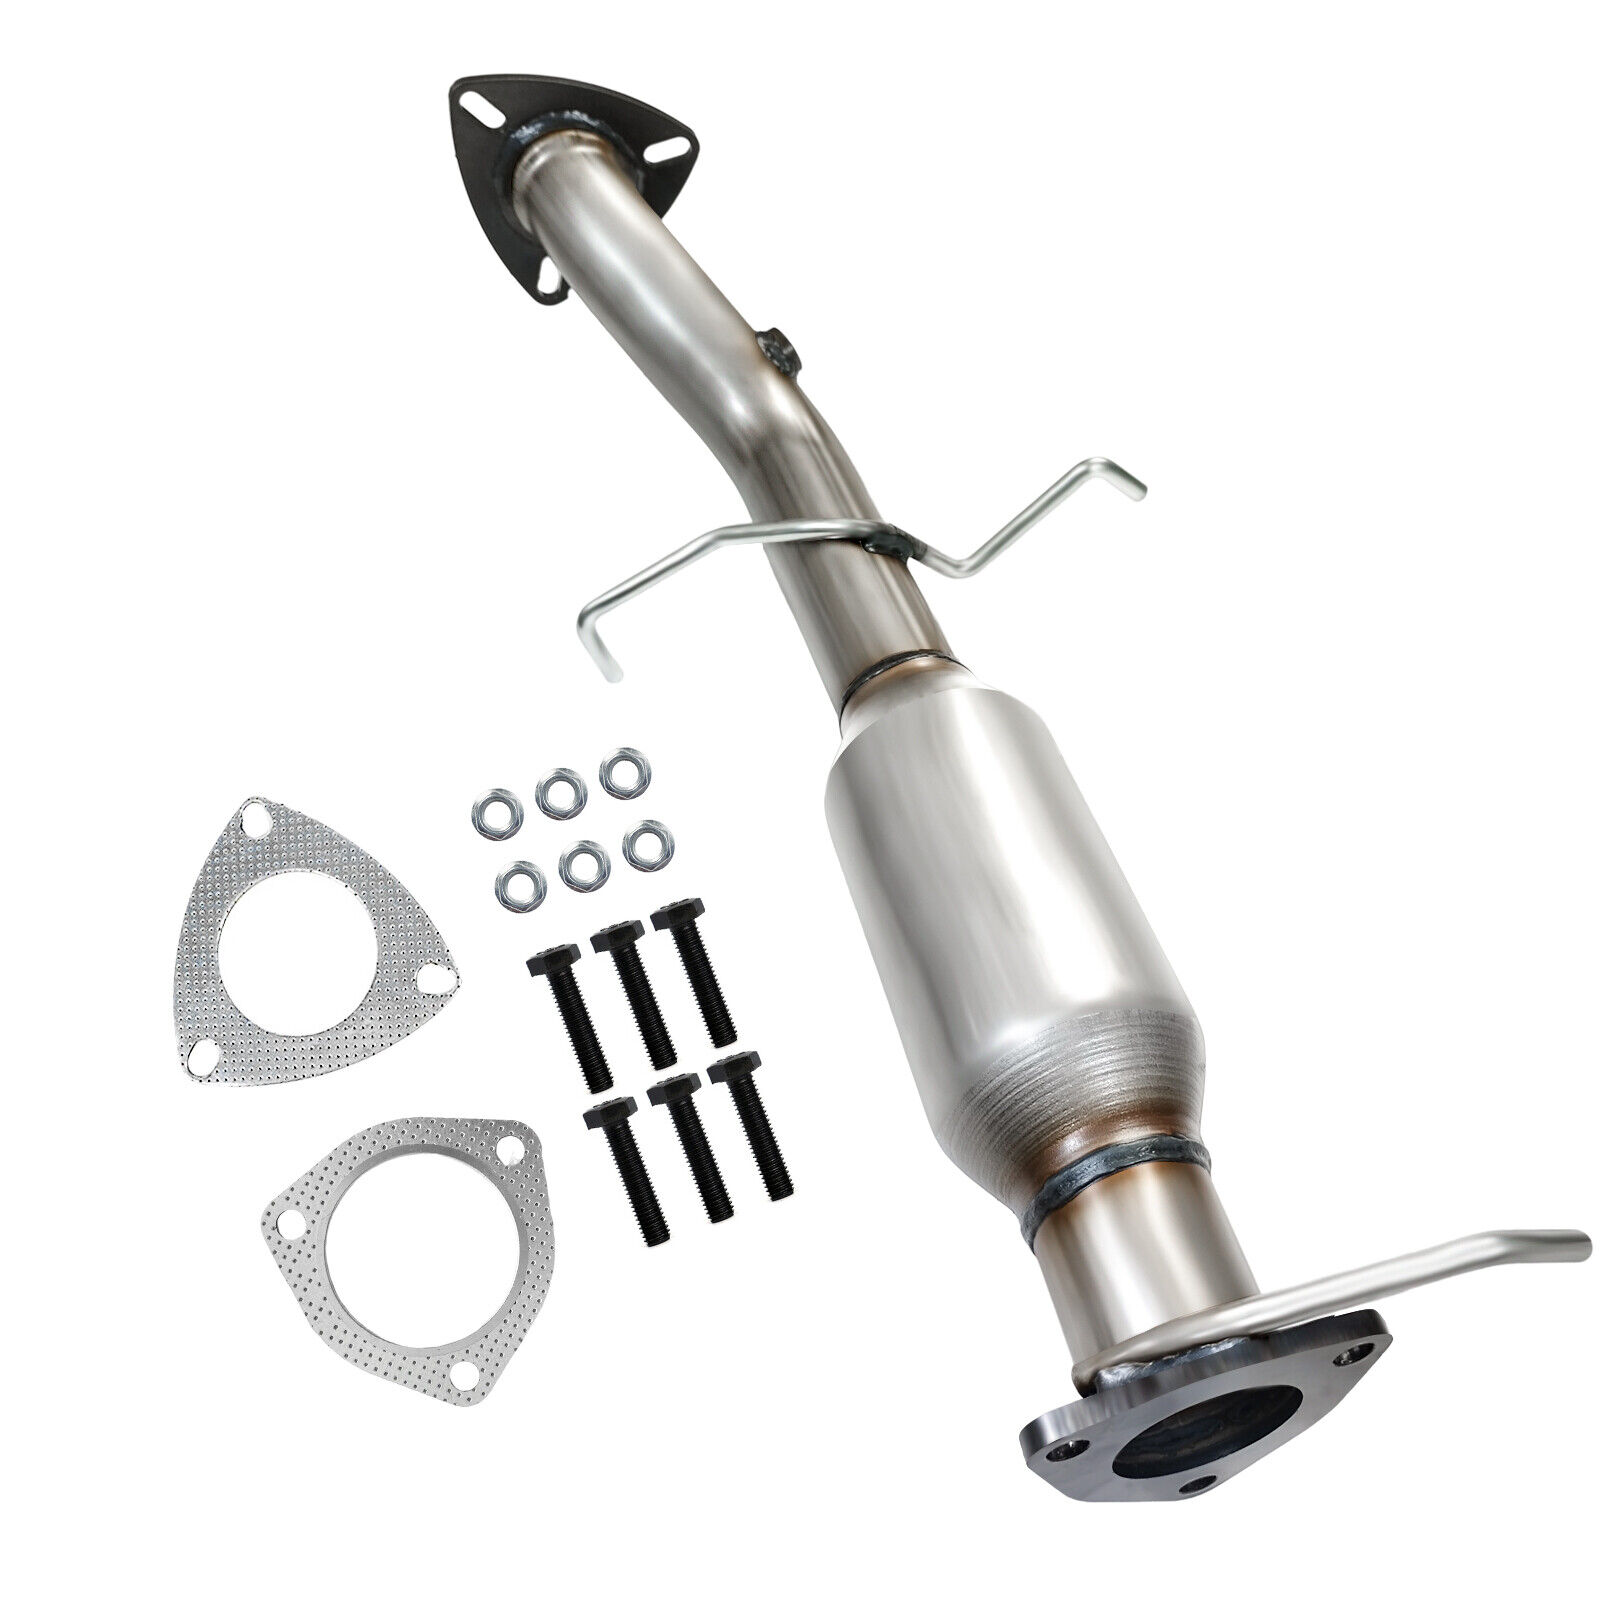 FOR 96-99 CHEVY BLAZER GMC JIMMY 4.3L V6 CATALYTIC CONVERTER REAR EXHAUST PIPE